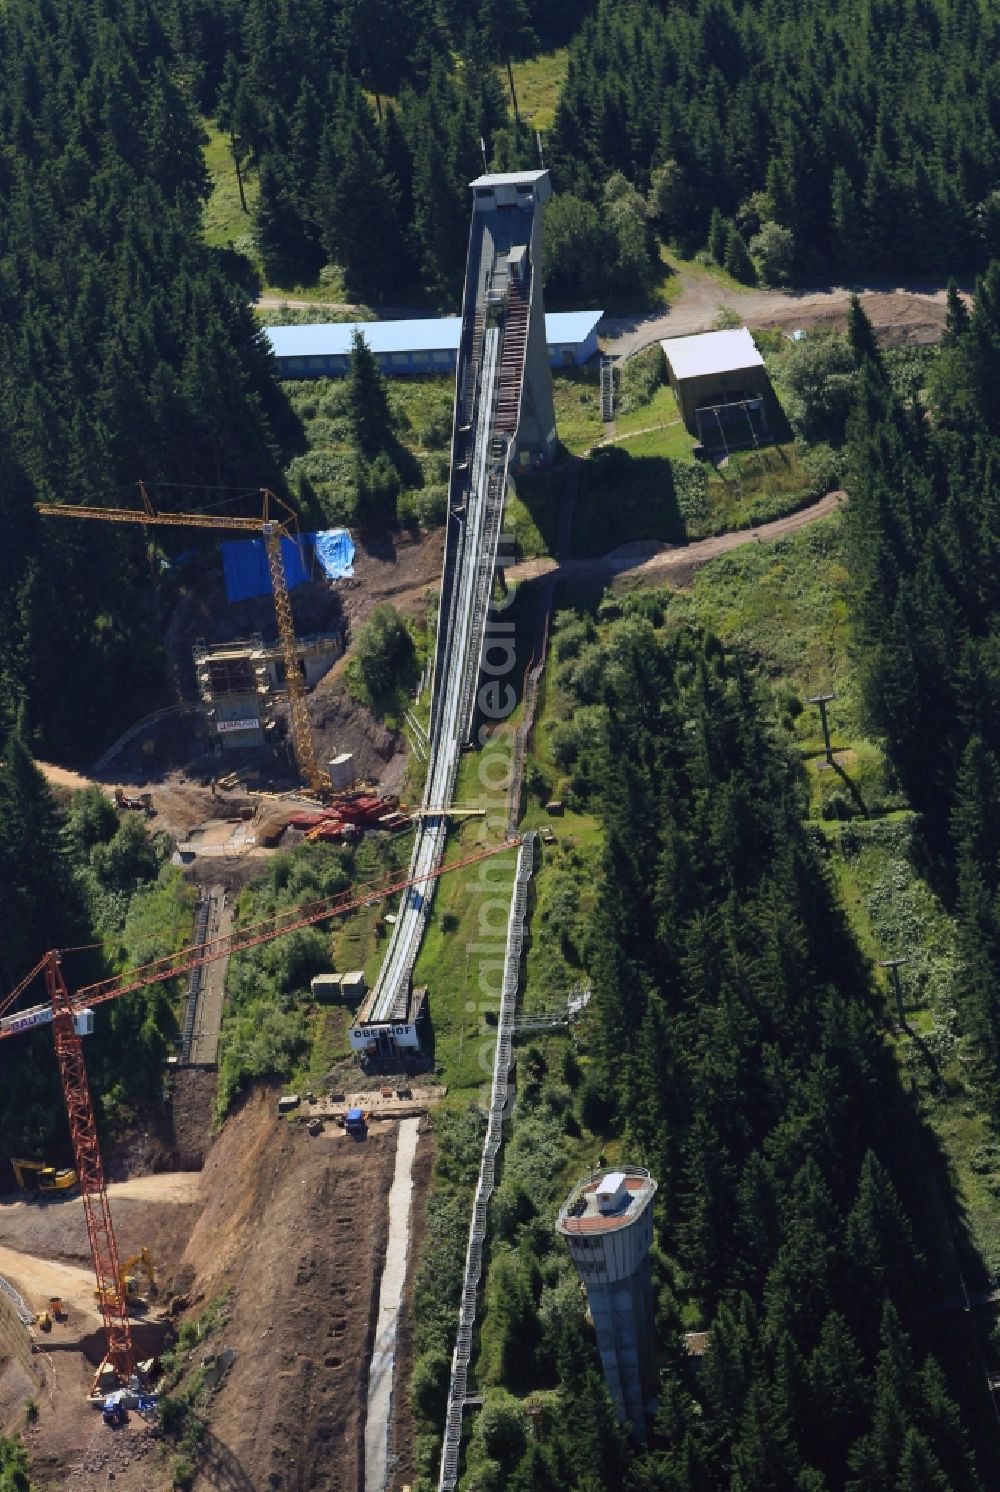 Oberhof from the bird's eye view: Construction site for the upgrading and renovation of the ski jump in Kanzlersgrund in Oberhof in Thuringia